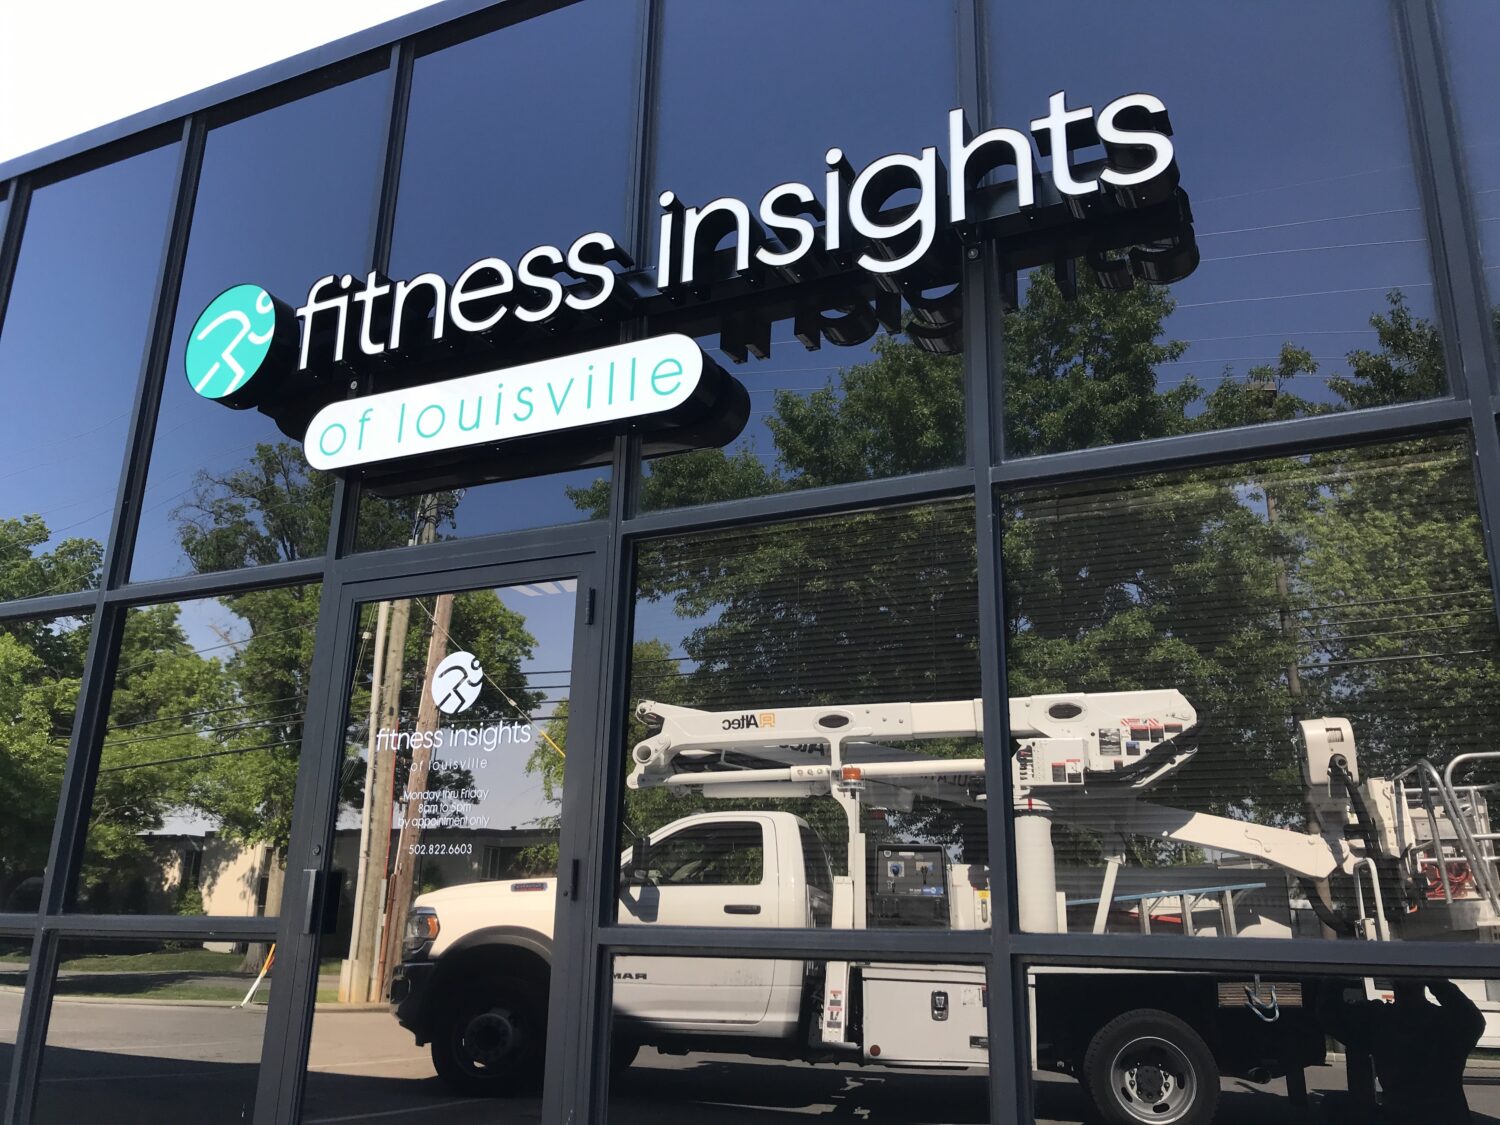 Channel Letter Sign for Fitness Insights of Louisville.